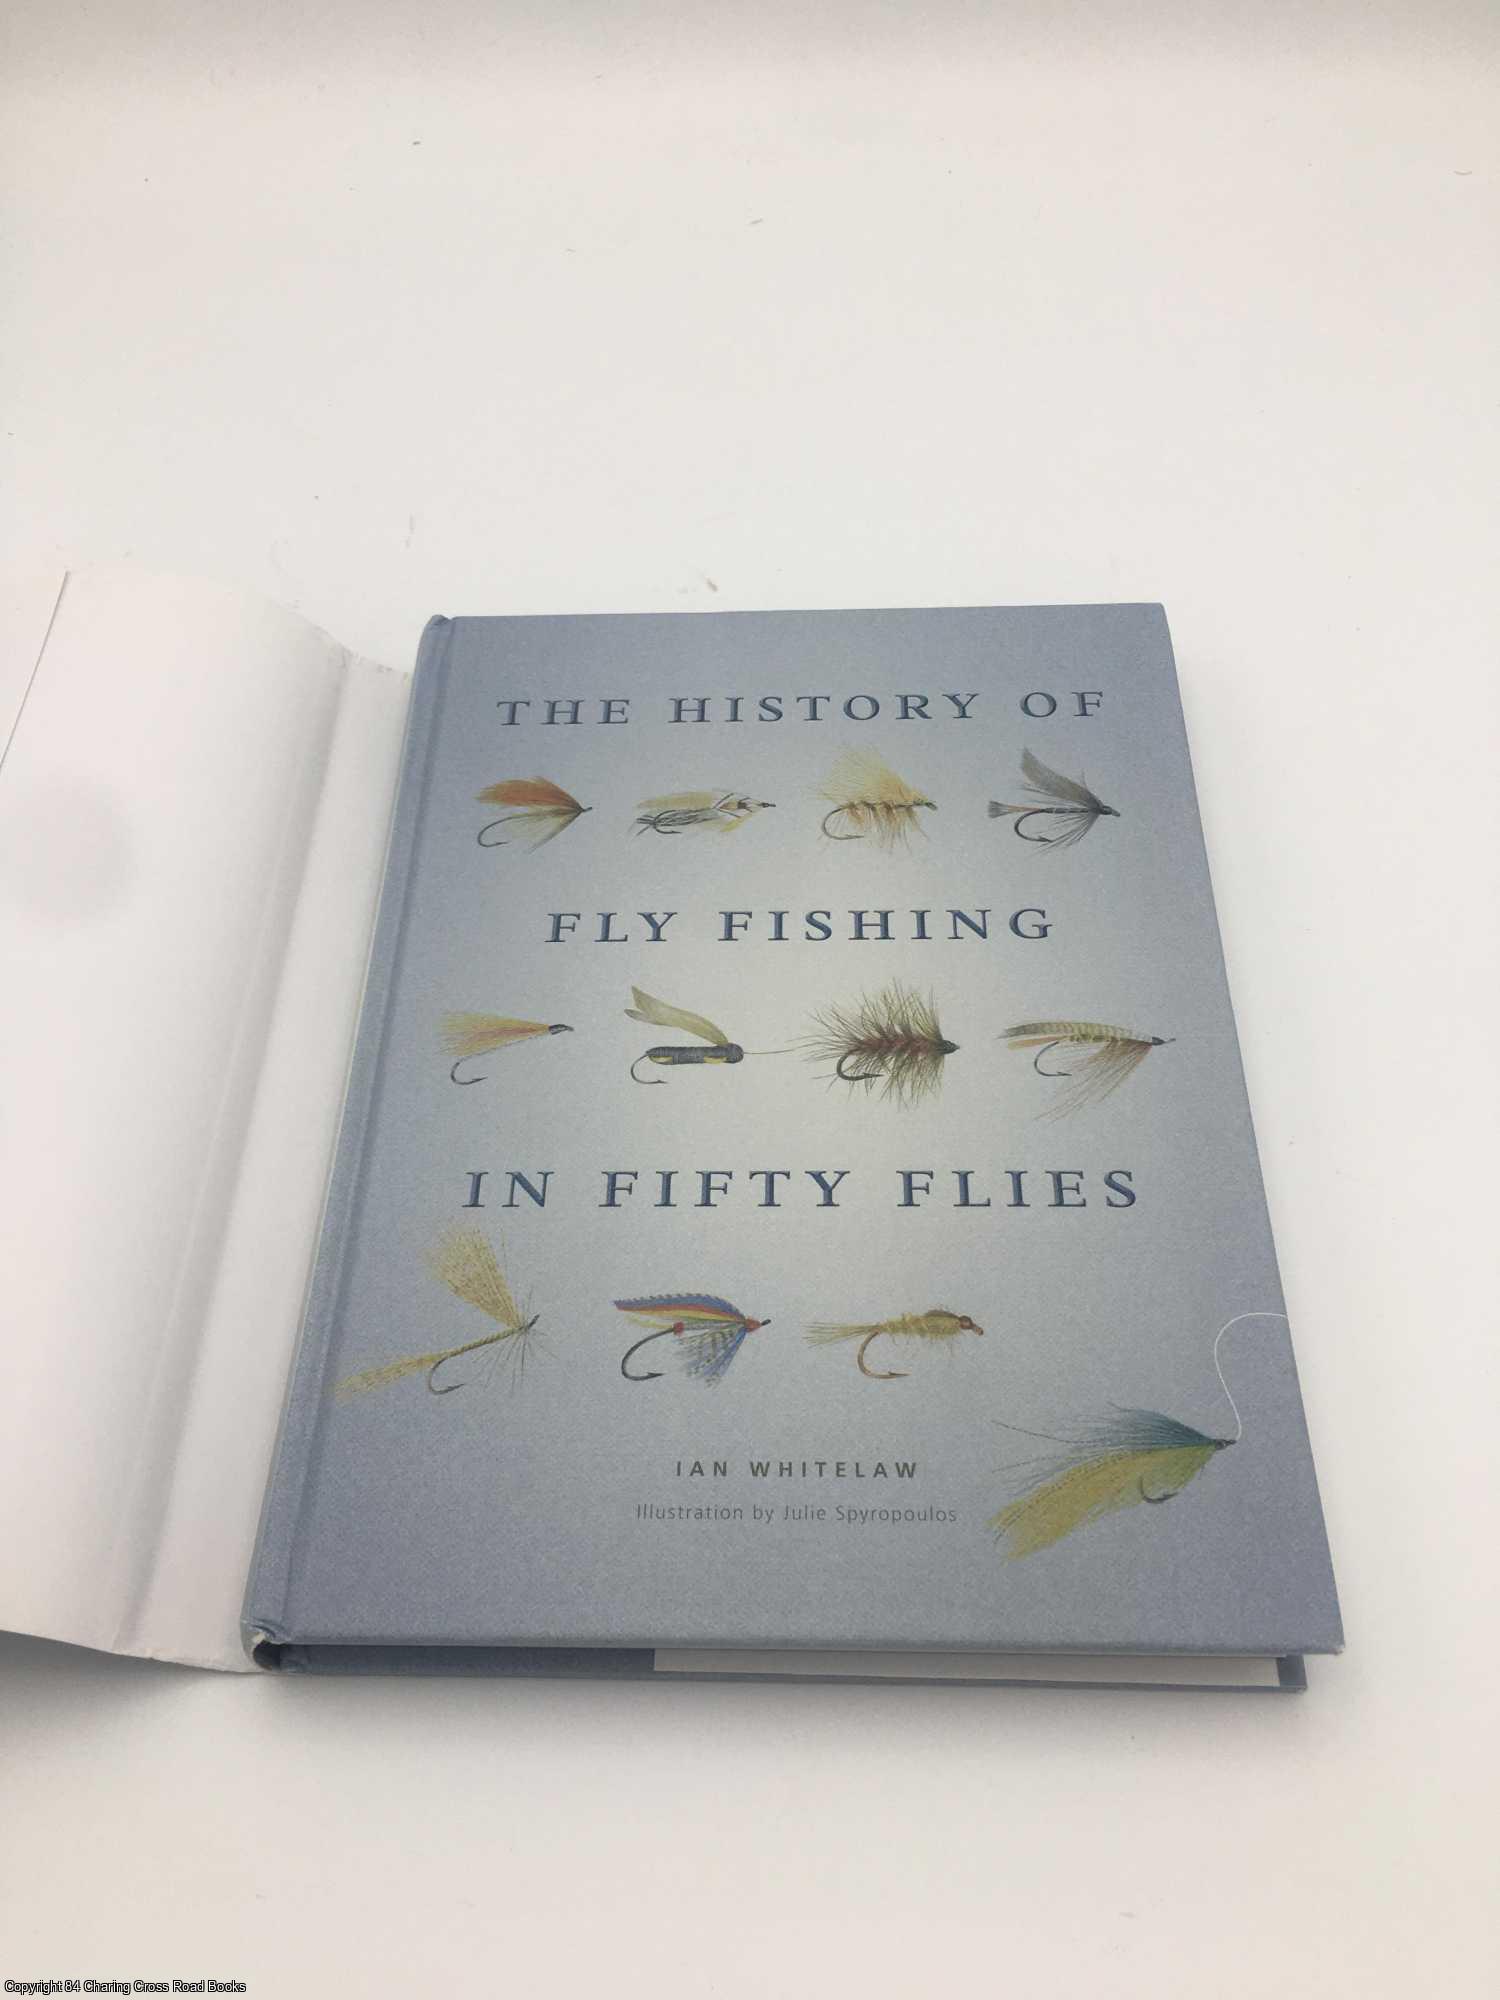 The History of Fly Fishing in Fifty Flies by Whitelaw, Ian: Collectable -  Very Good Hardback (2015) First Edition.